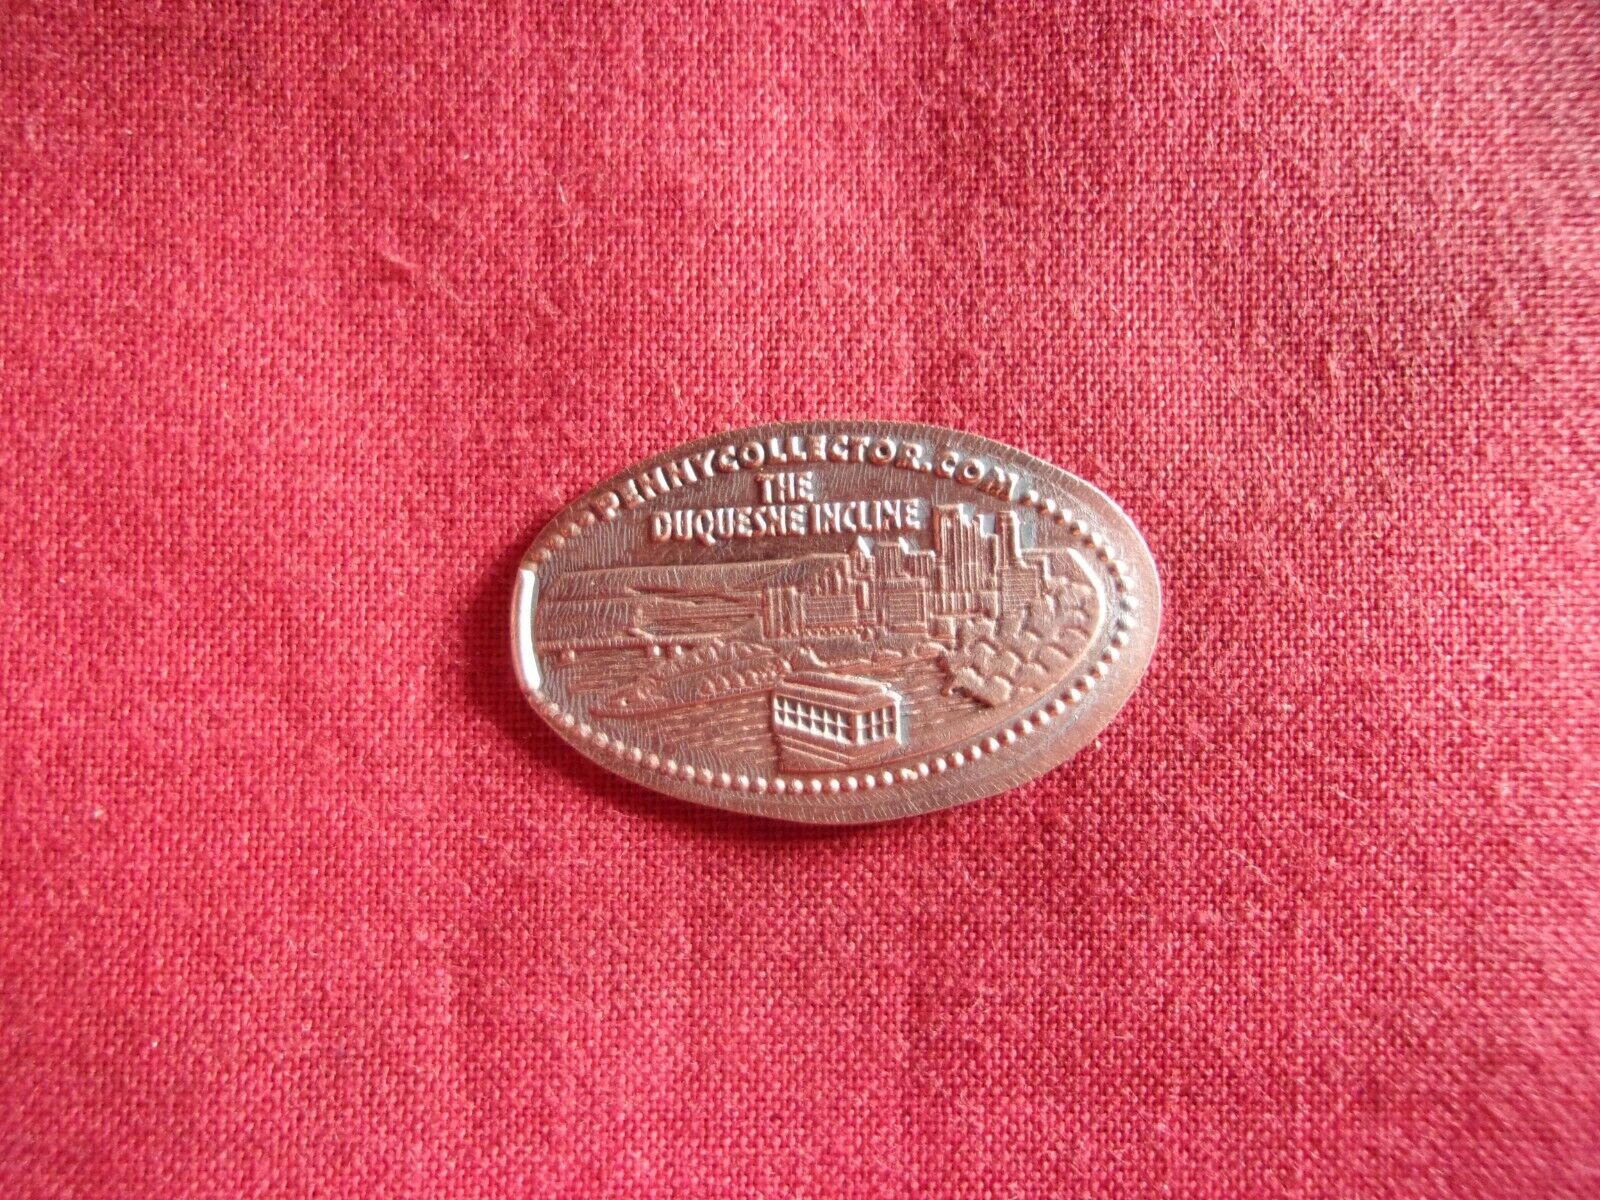 THE DUQUESNE INCLINE Elongated Penny Pressed Smashed 7